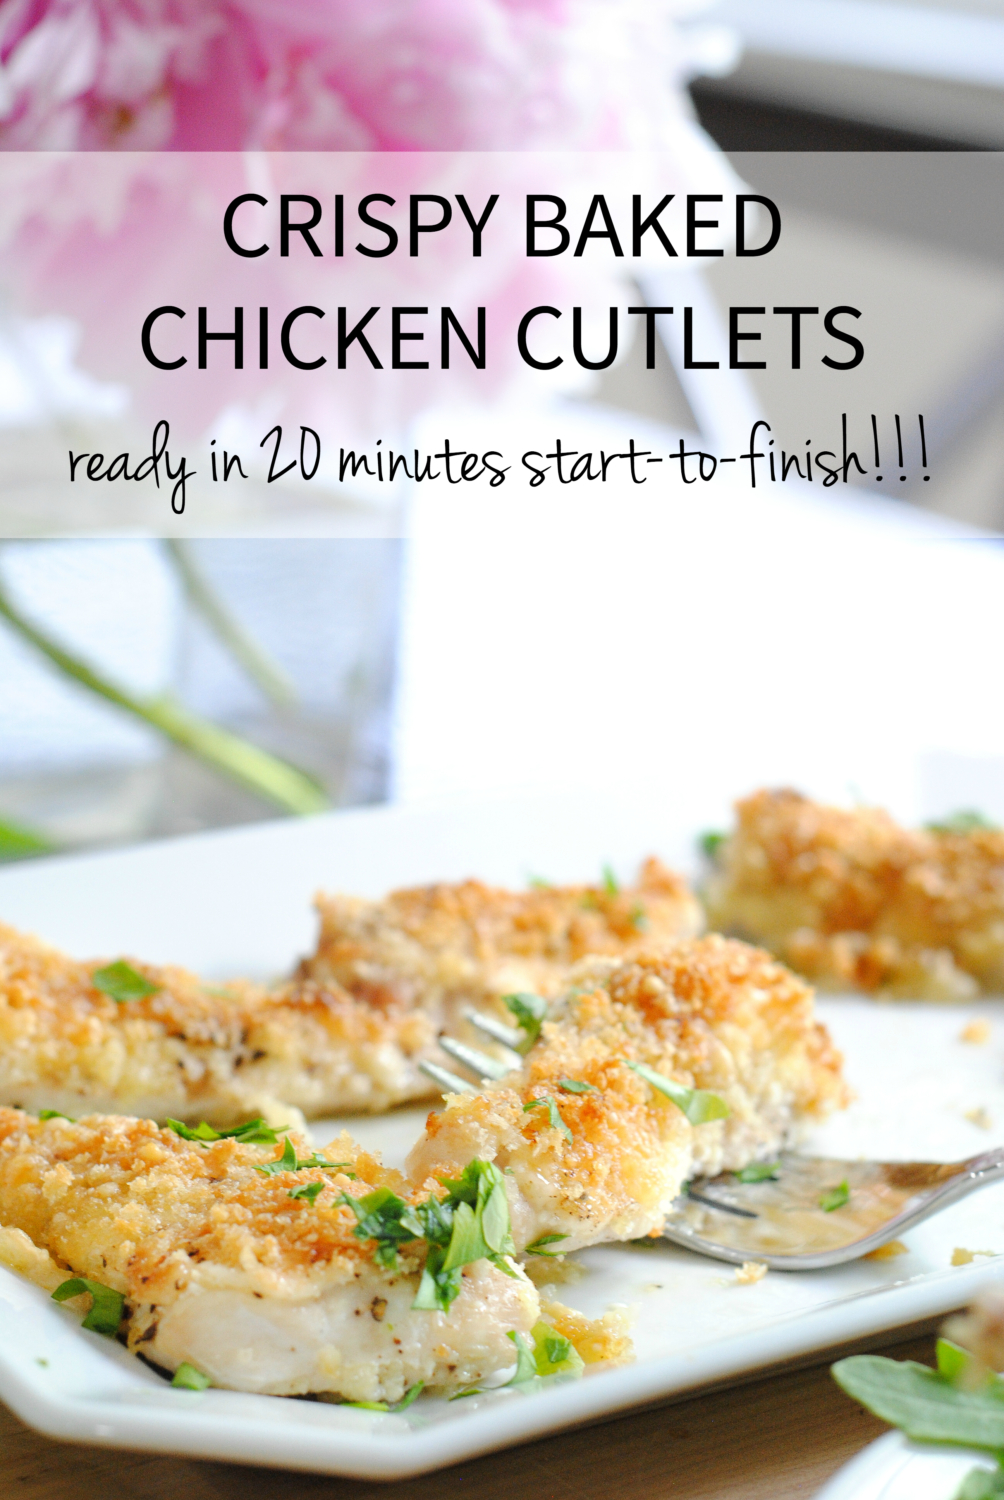 The easiest breaded chicken cutlets recipe EVER! Baked in the over and ready in 20 minutes, start to finish! This recipe is definitely a KEEPER!